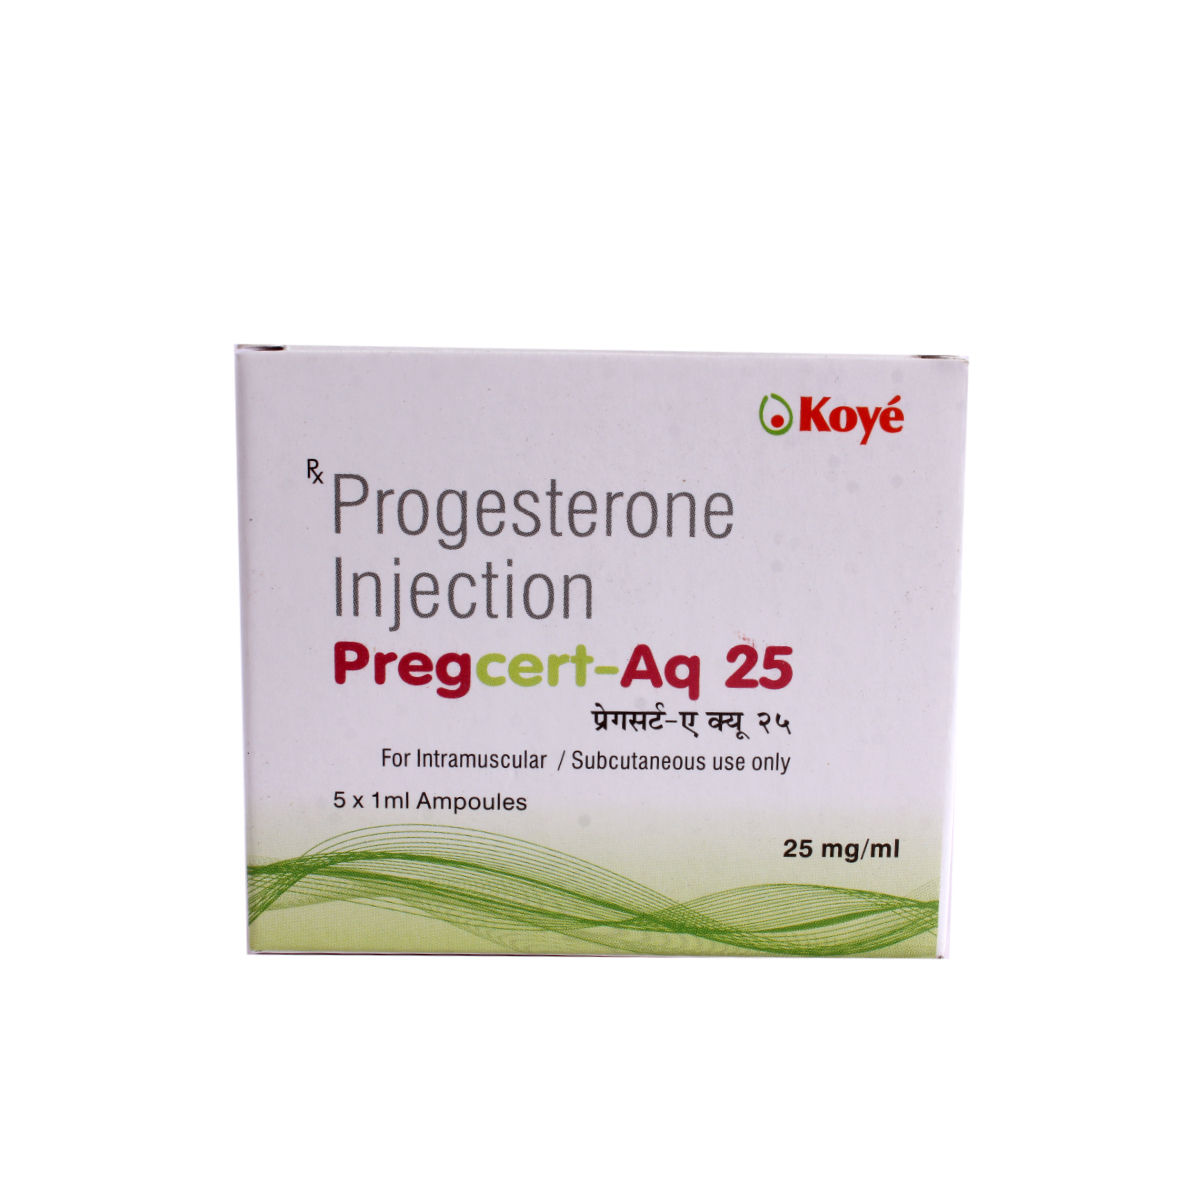 Aqsusten 25 MG Injection - Uses, Dosage, Side Effects, Price, Composition